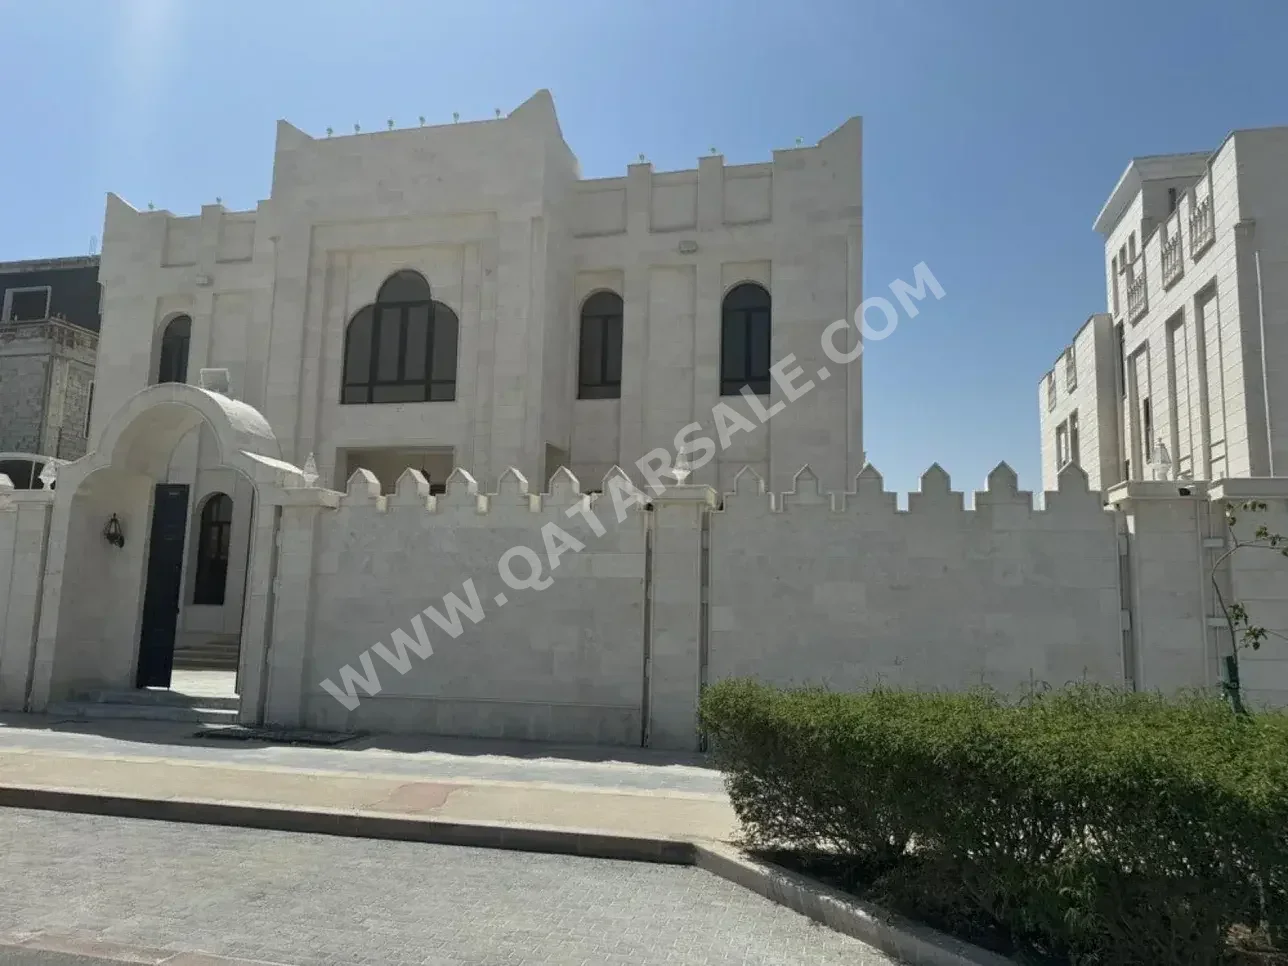 Family Residential  Semi Furnished  Lusail  Fox Hills  6 Bedrooms